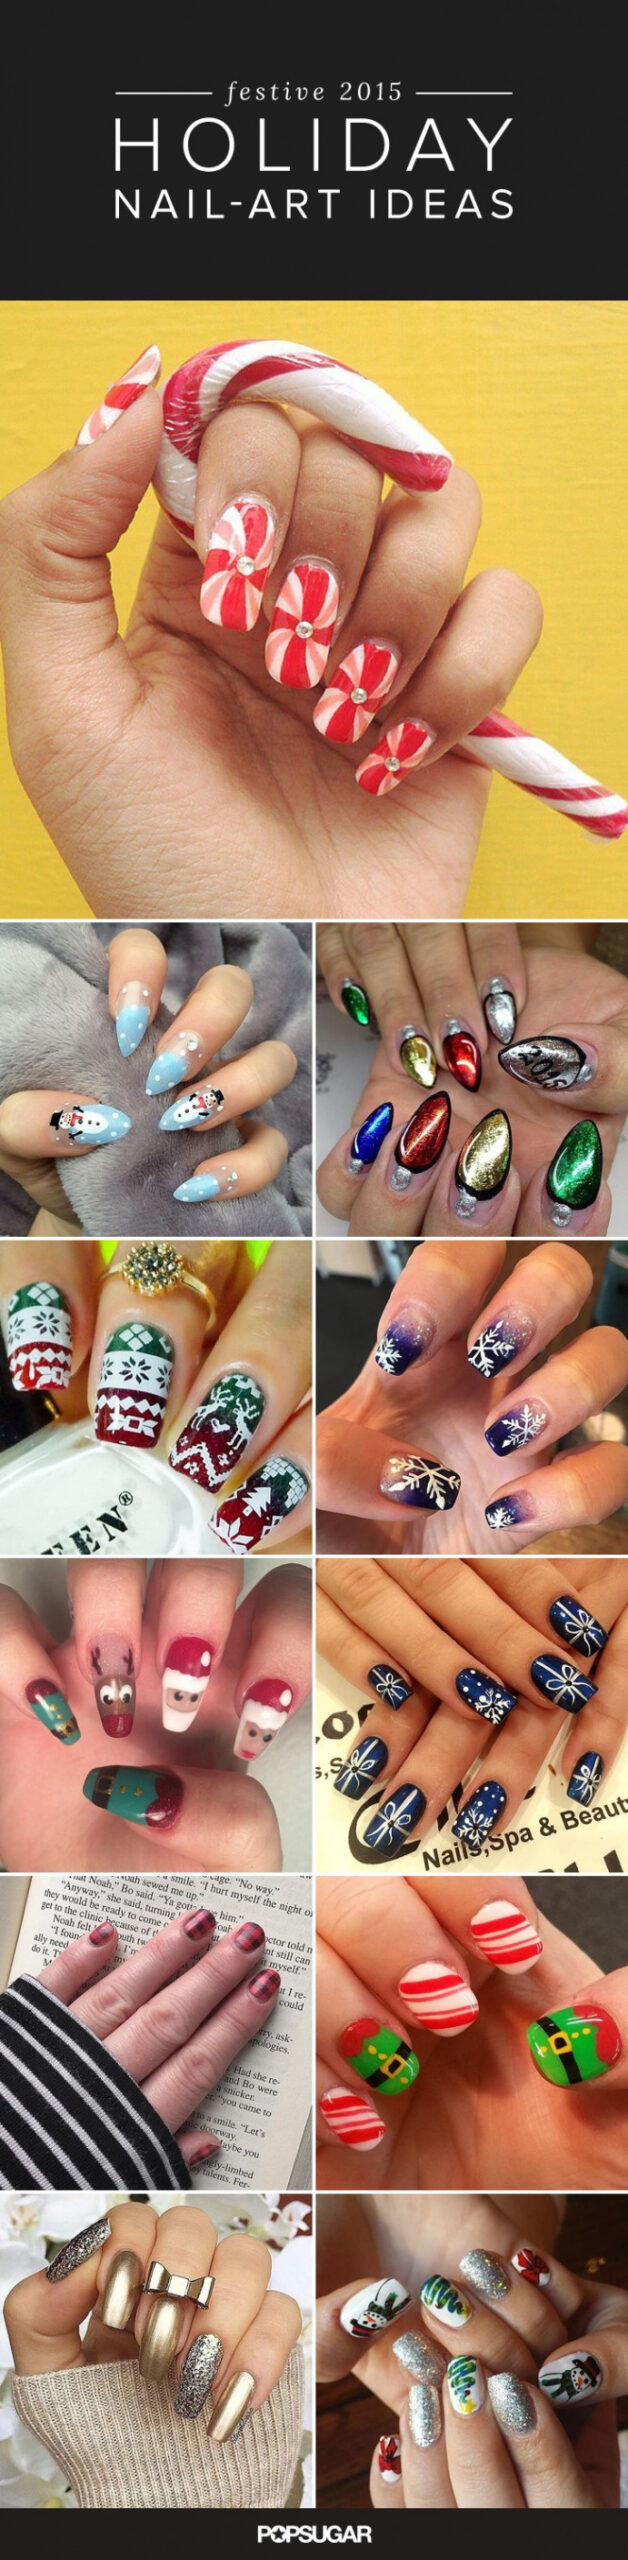 Holiday Nail Art Ideas That Will Put You in a Celebratory Mood